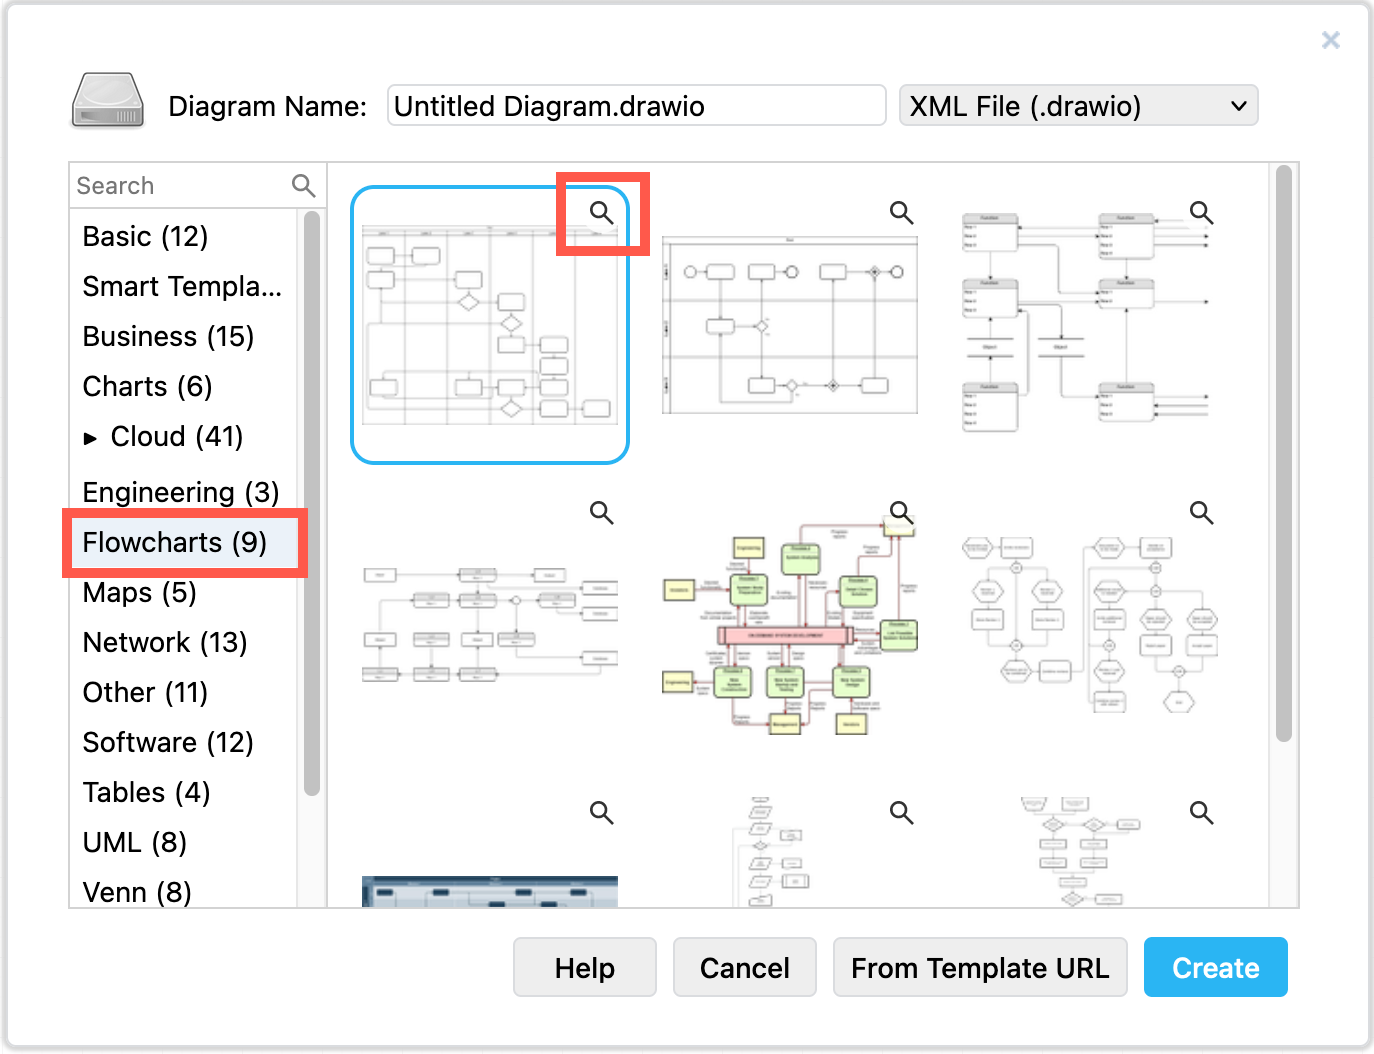 More complex flowcharts with swimlanes are found under the Flowchart category in the template library